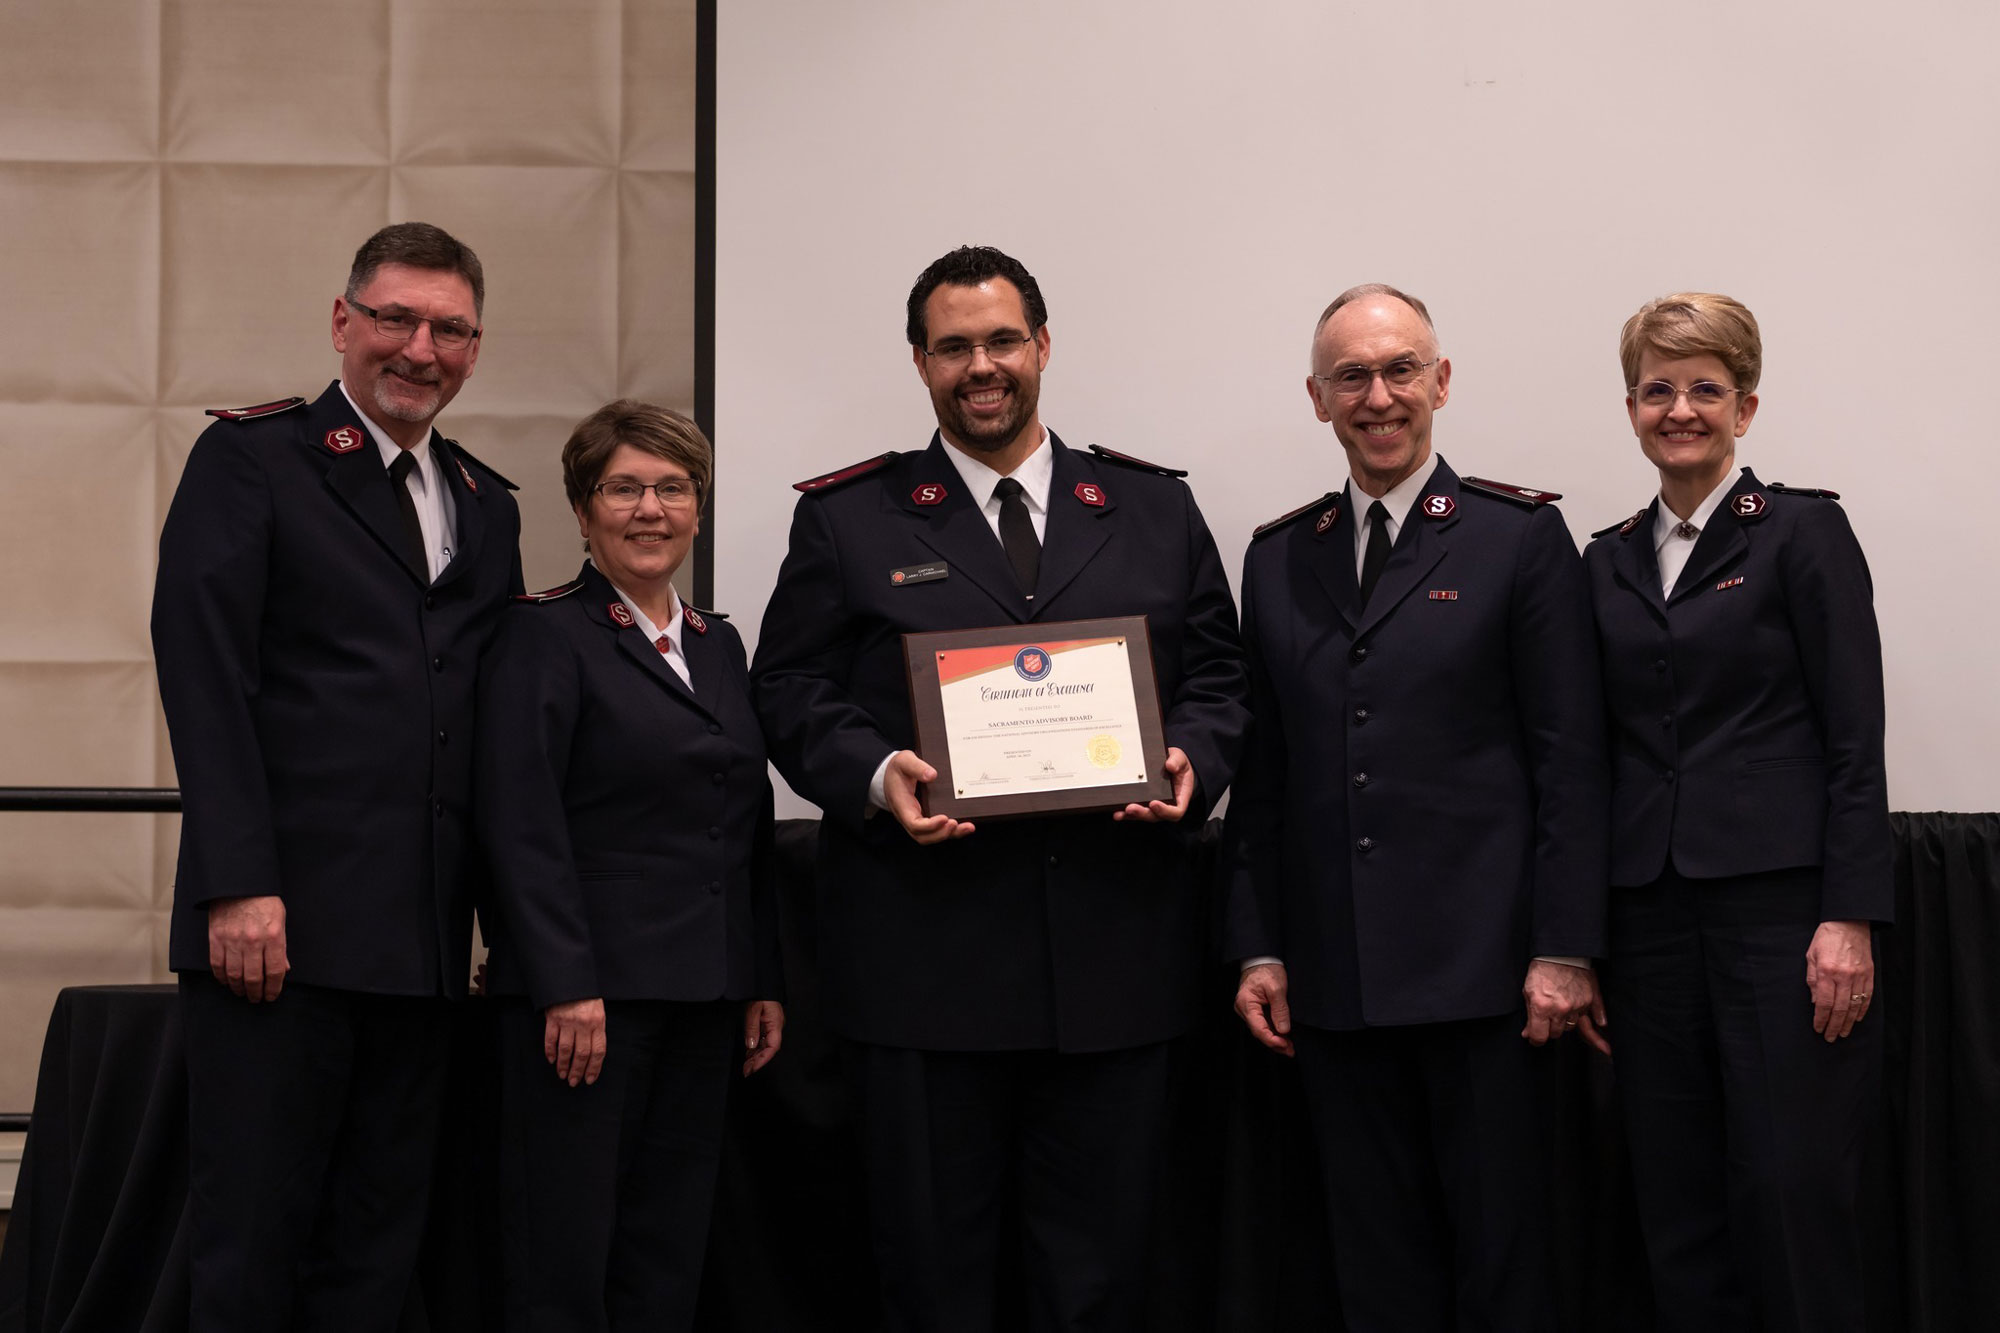 Standards of Excellence program aims to empower Salvation Army advisory organizations